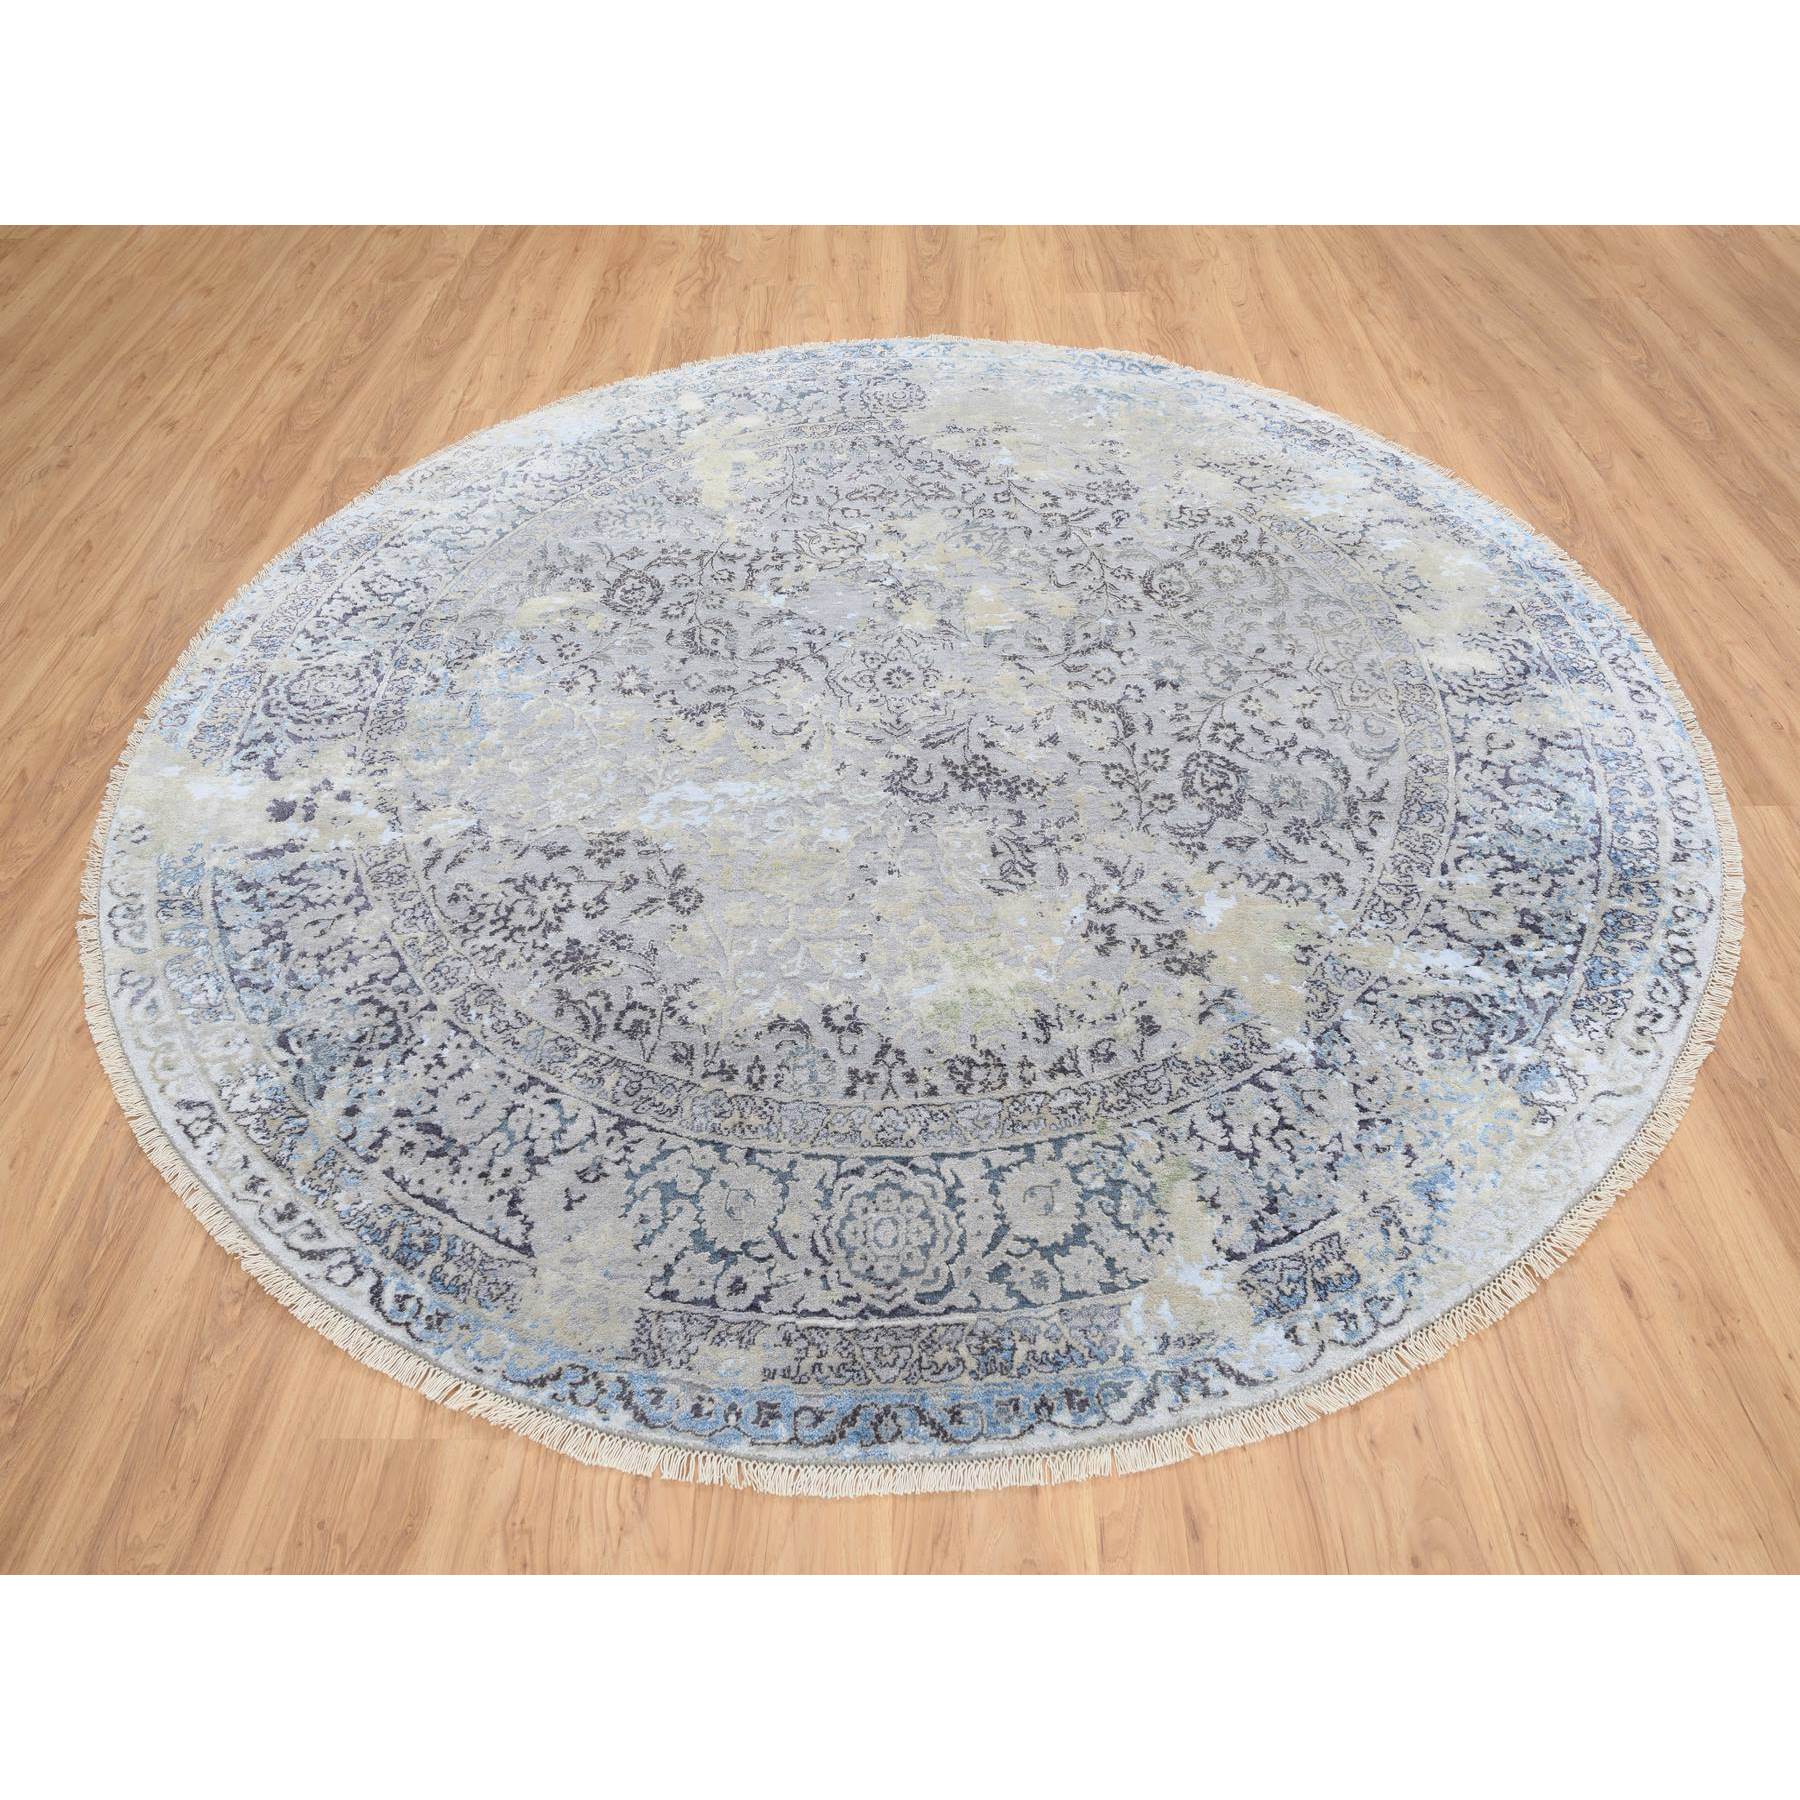 8'1"x8'1" Gray and Blue, Broken Kashan Design, Wool With Pure Silk Hand Woven, Round Oriental Rug 